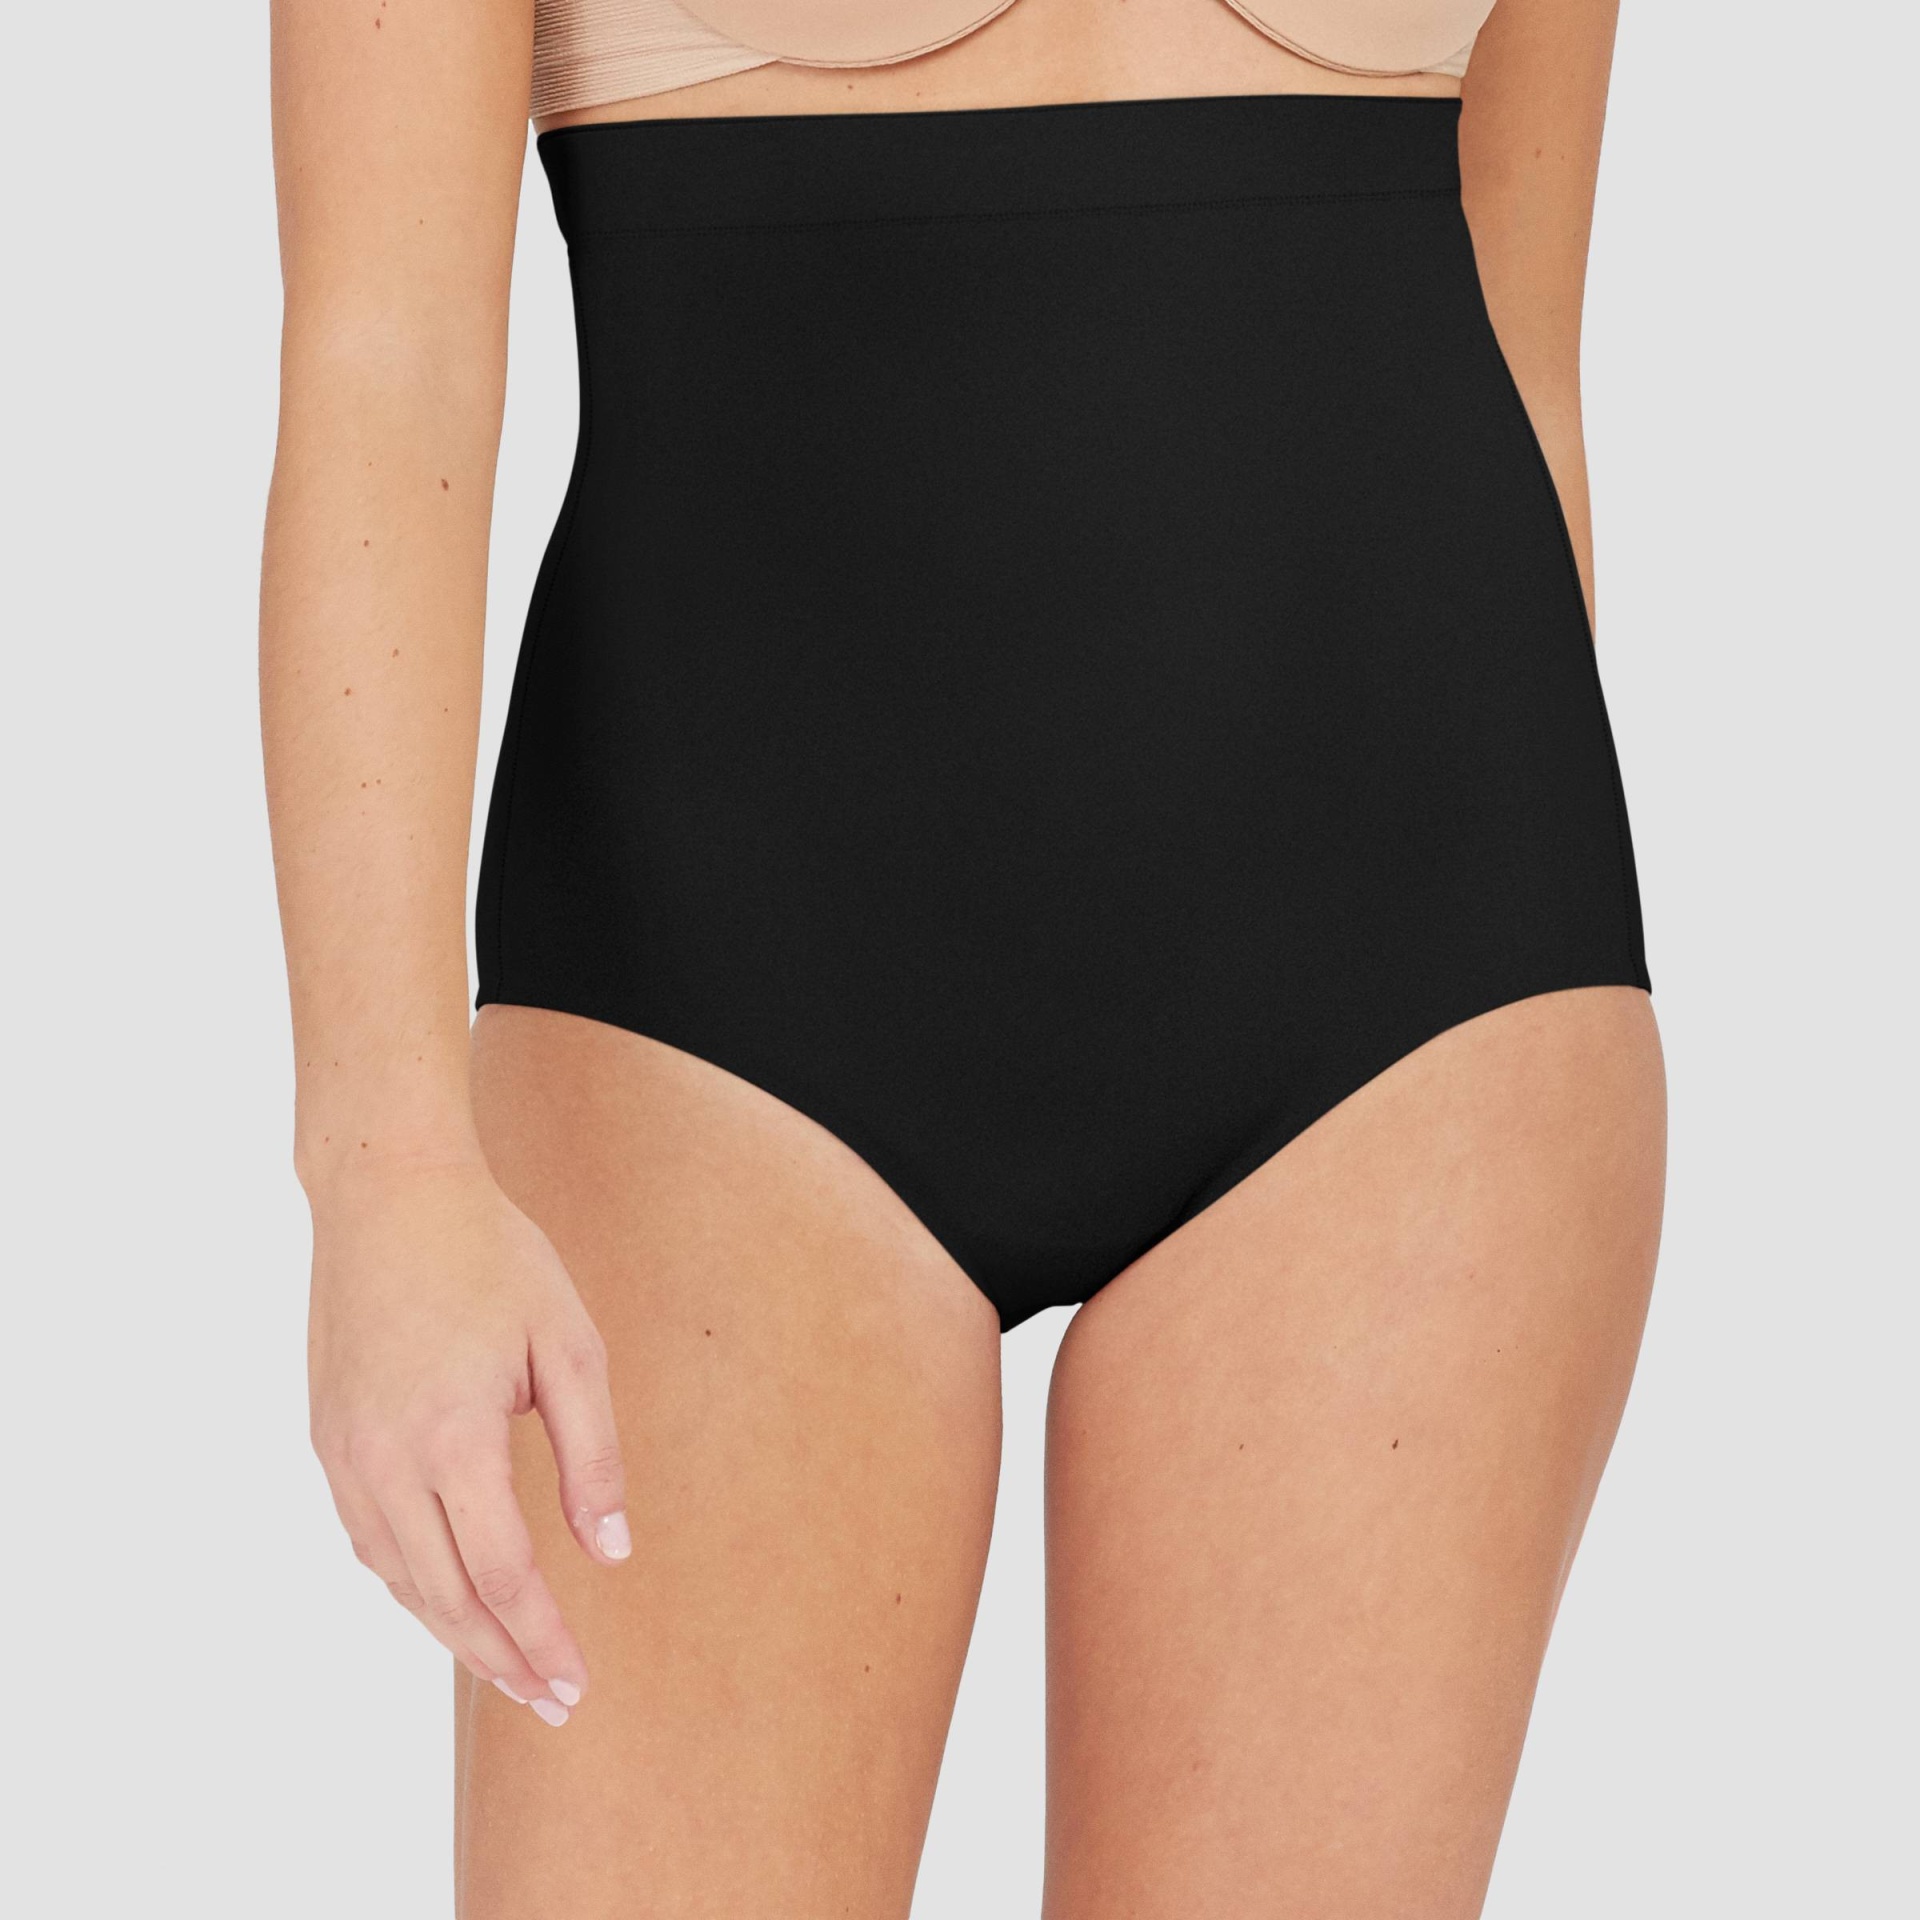 Assets by SPANX Women's Thintuition Shaping High Waist Brief - Black XL 1  ct